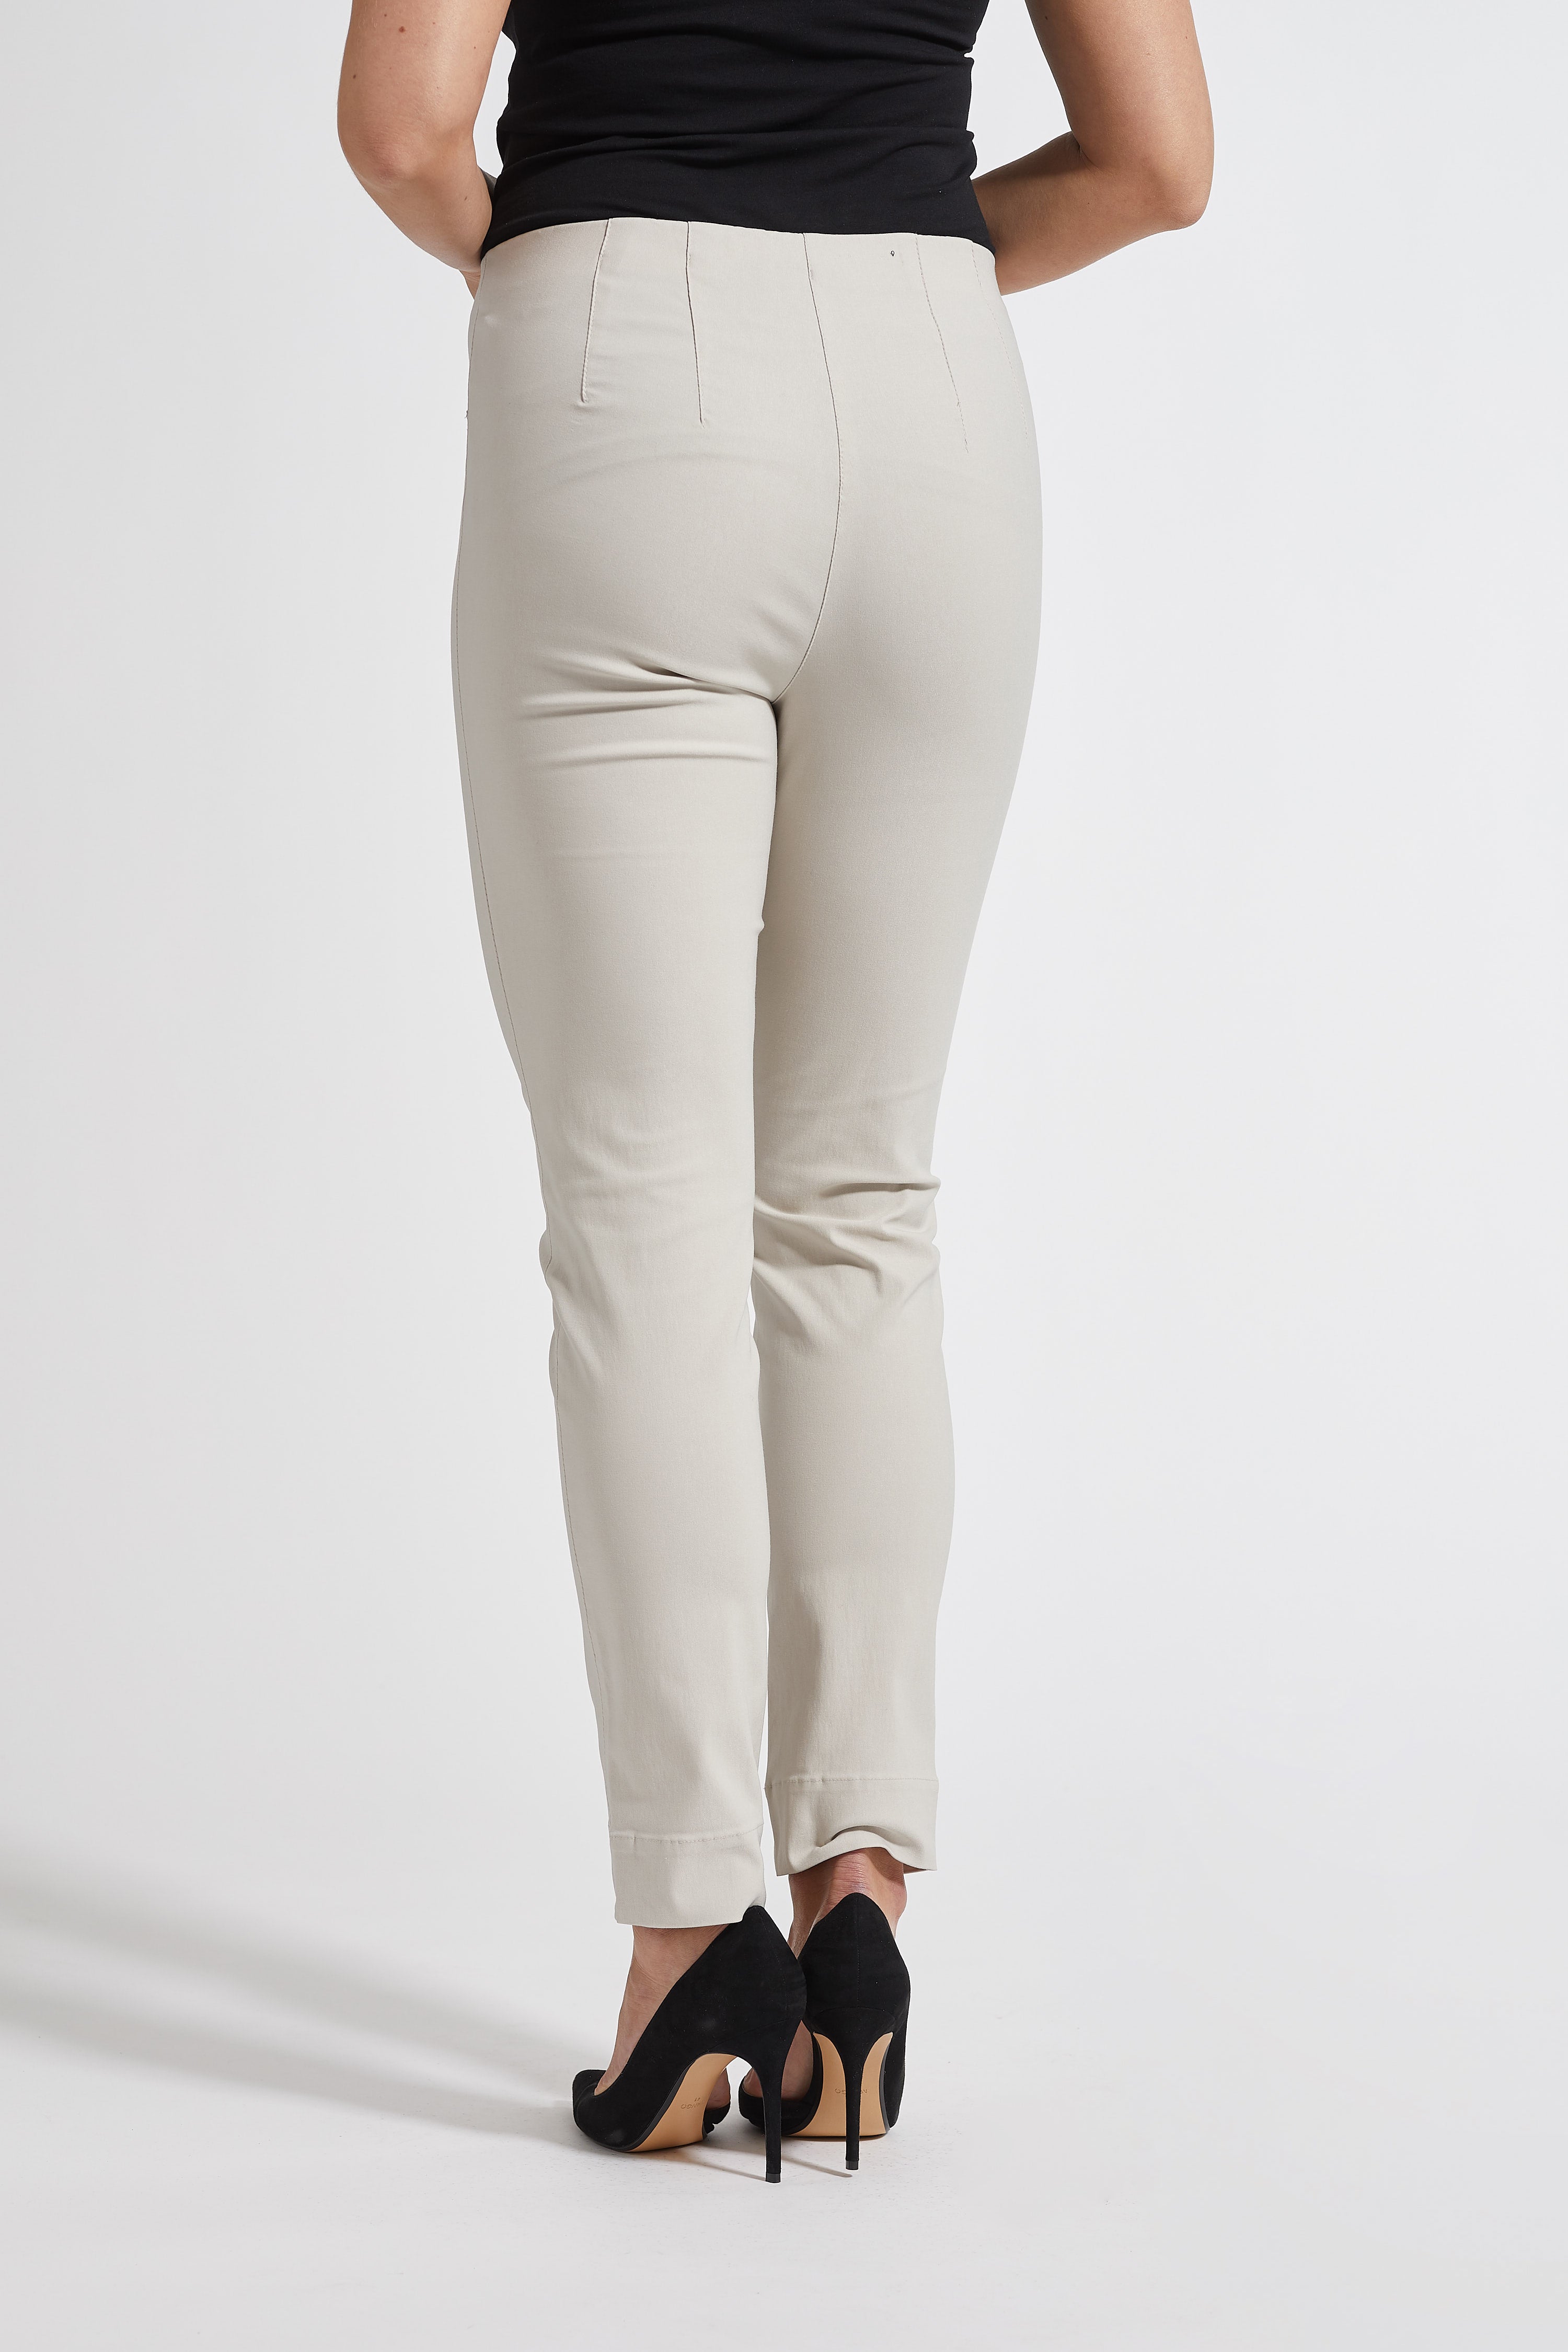 LAURIE  Vicky Slim - Short Length Trousers SLIM 25137 Grey Sand